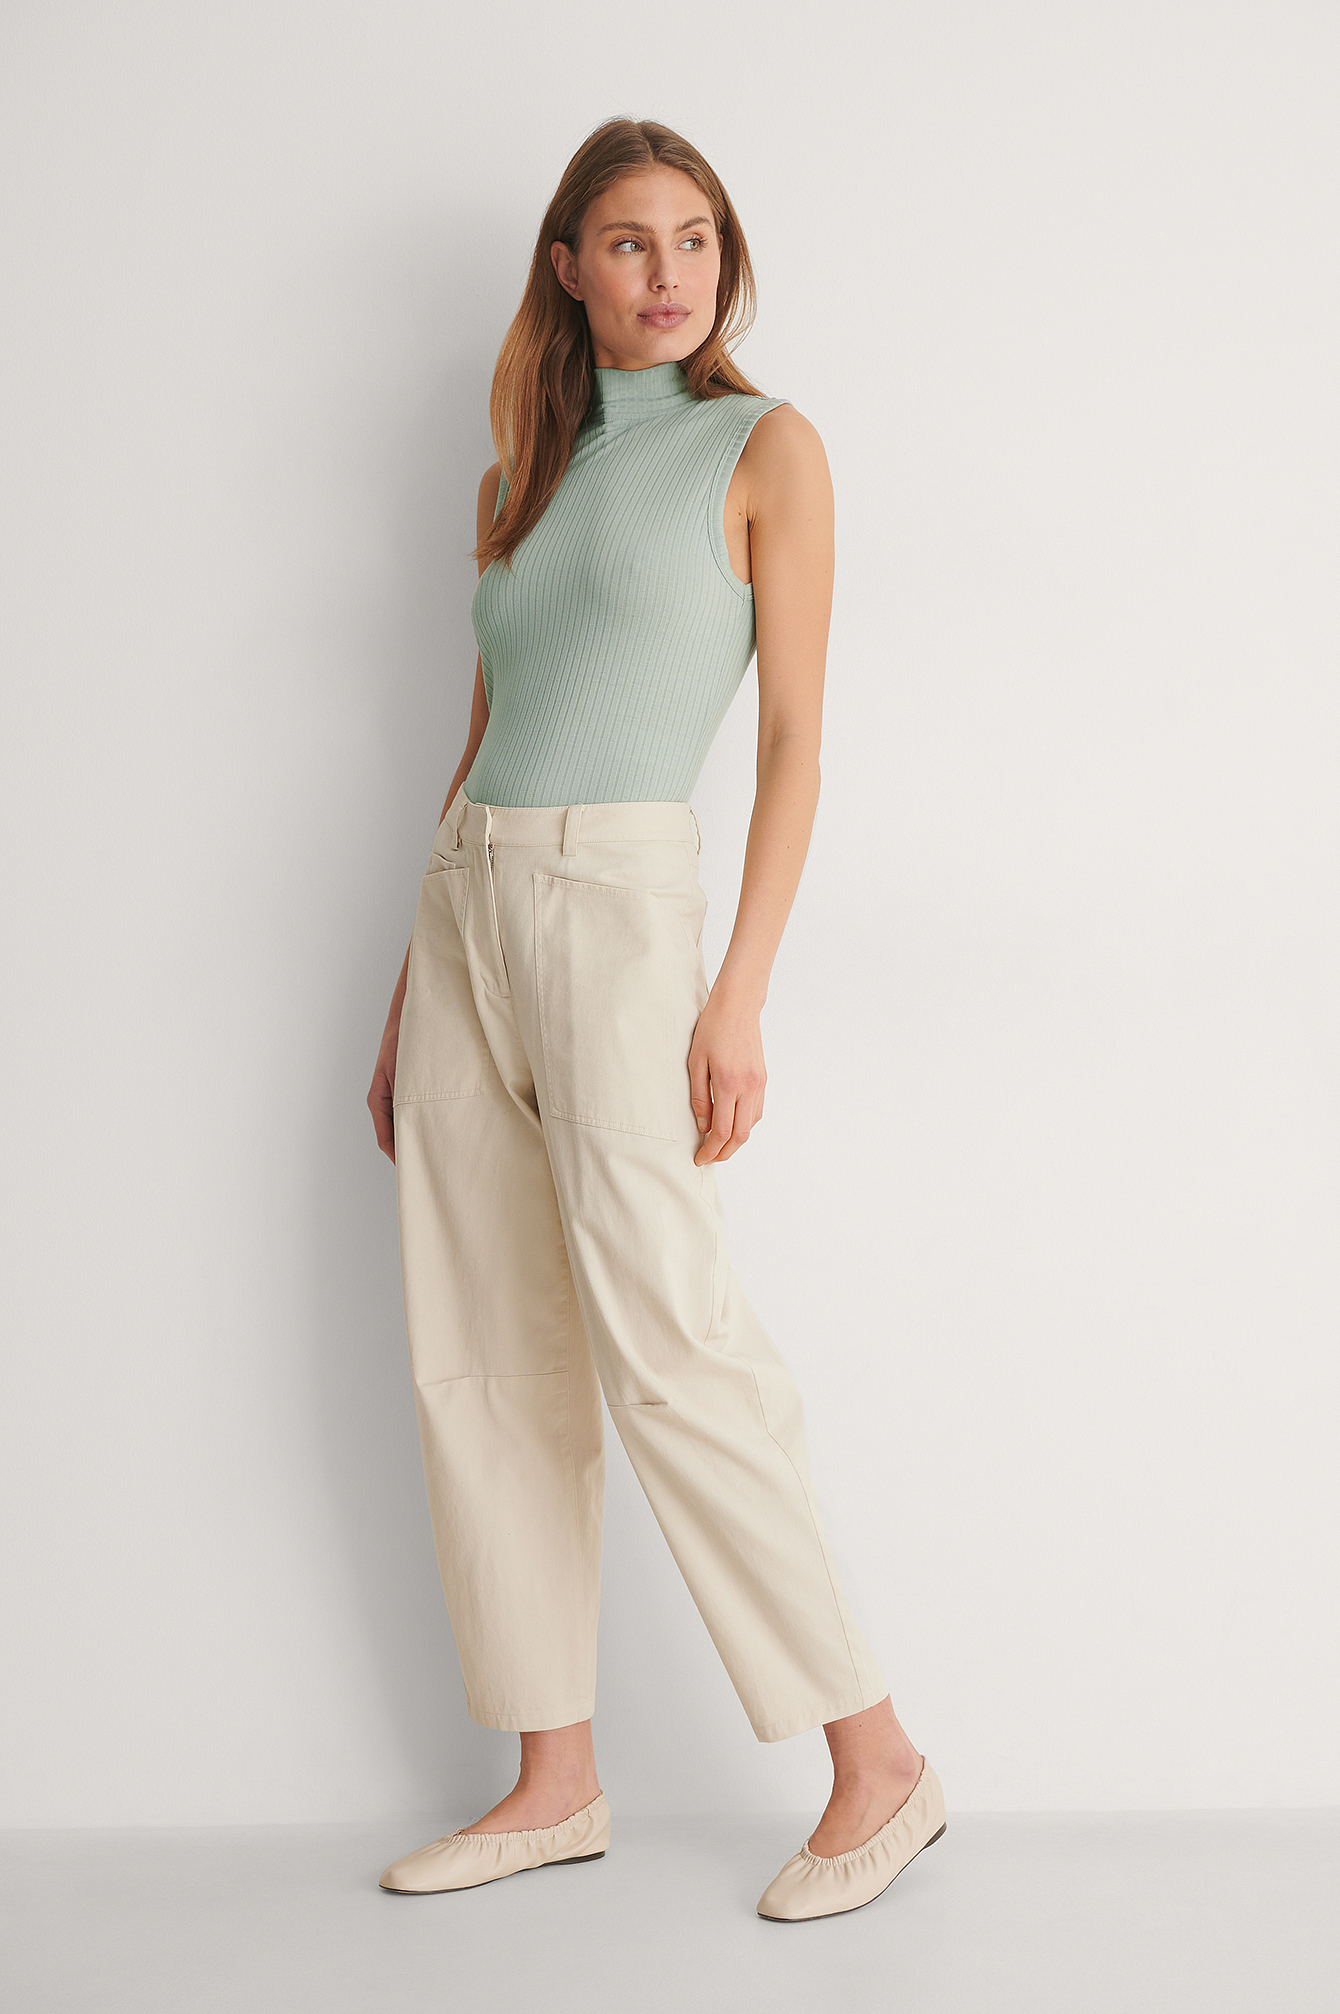 Ribbed Tie Neck Detail Top Outfit